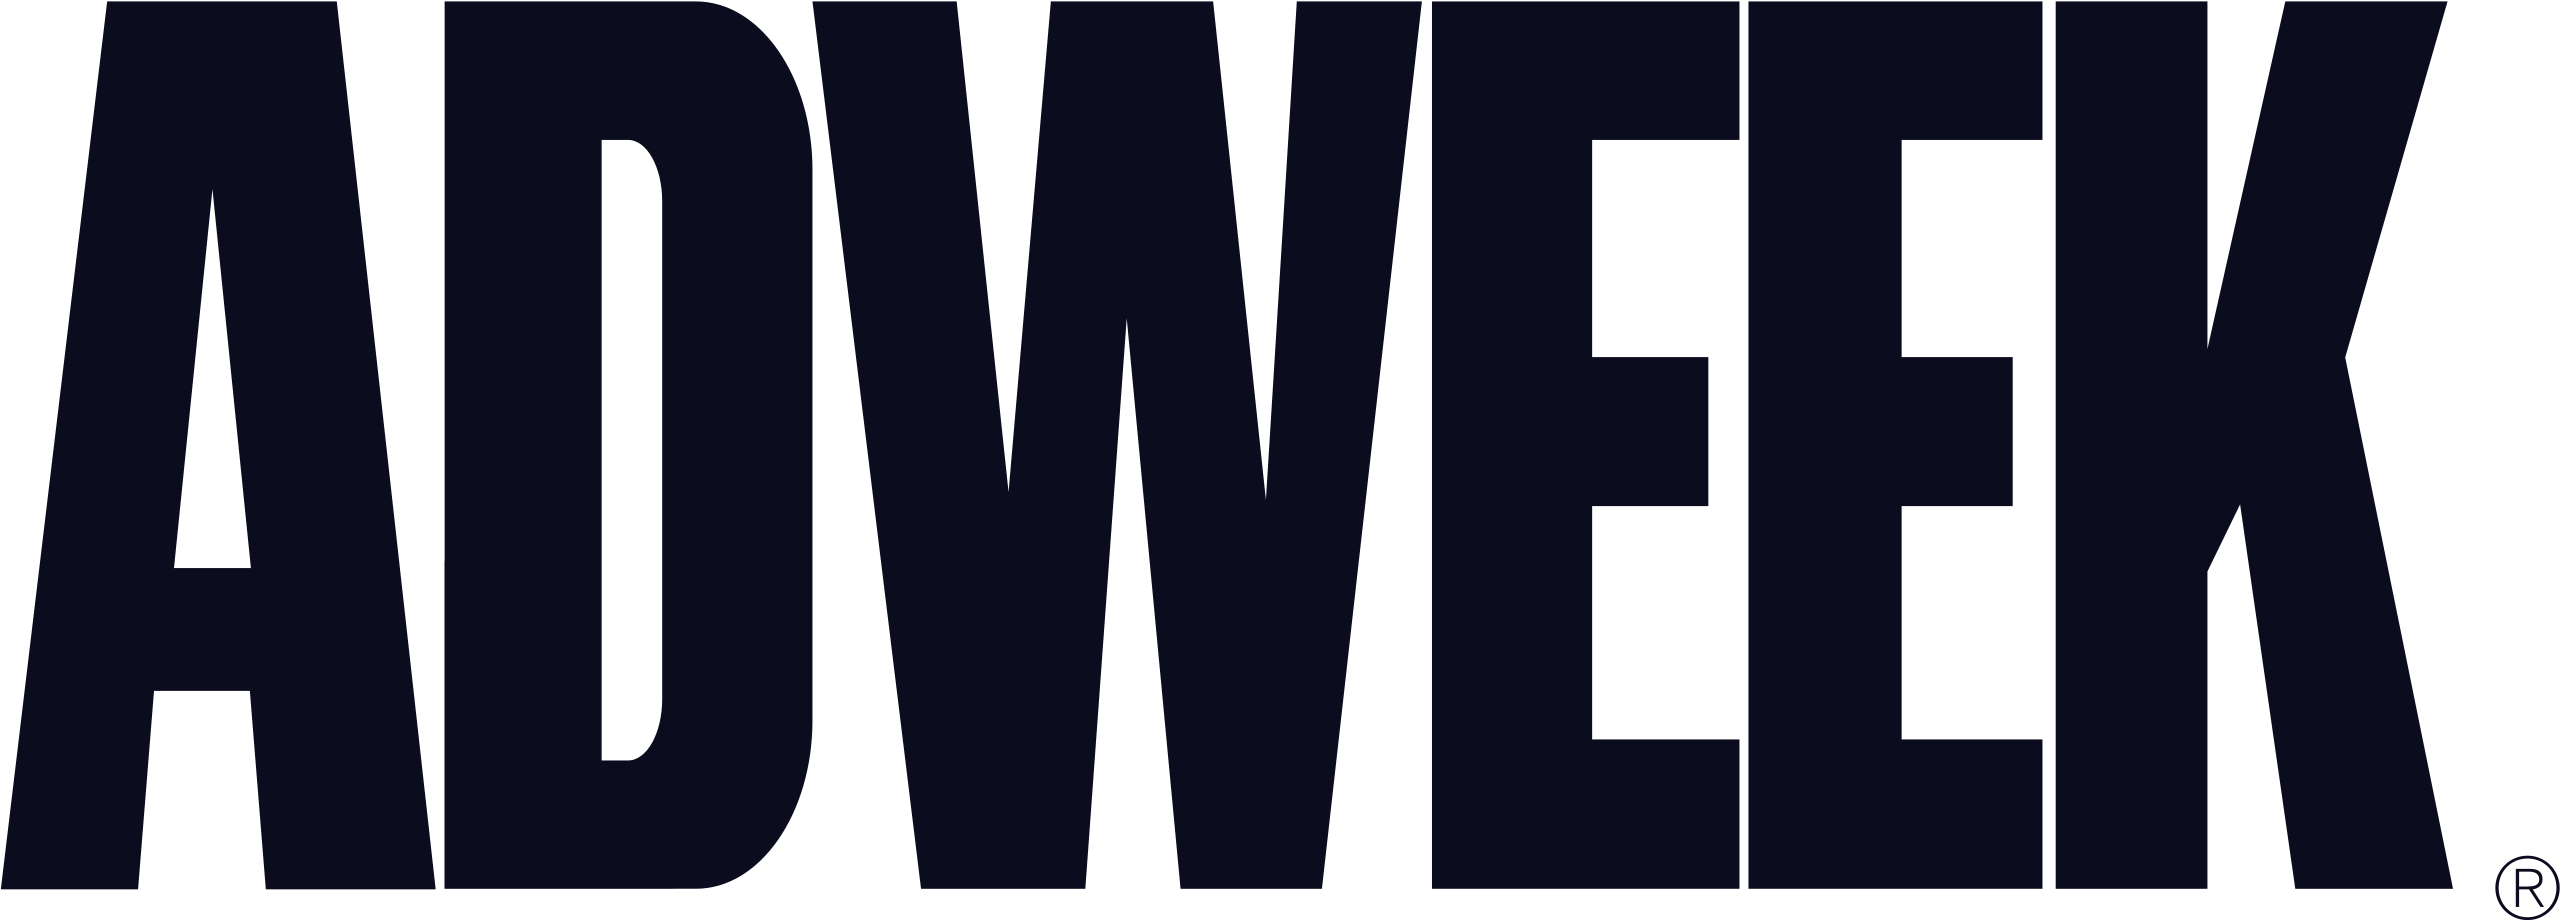 Adweek logo - the word Adweek written out in all capital letters